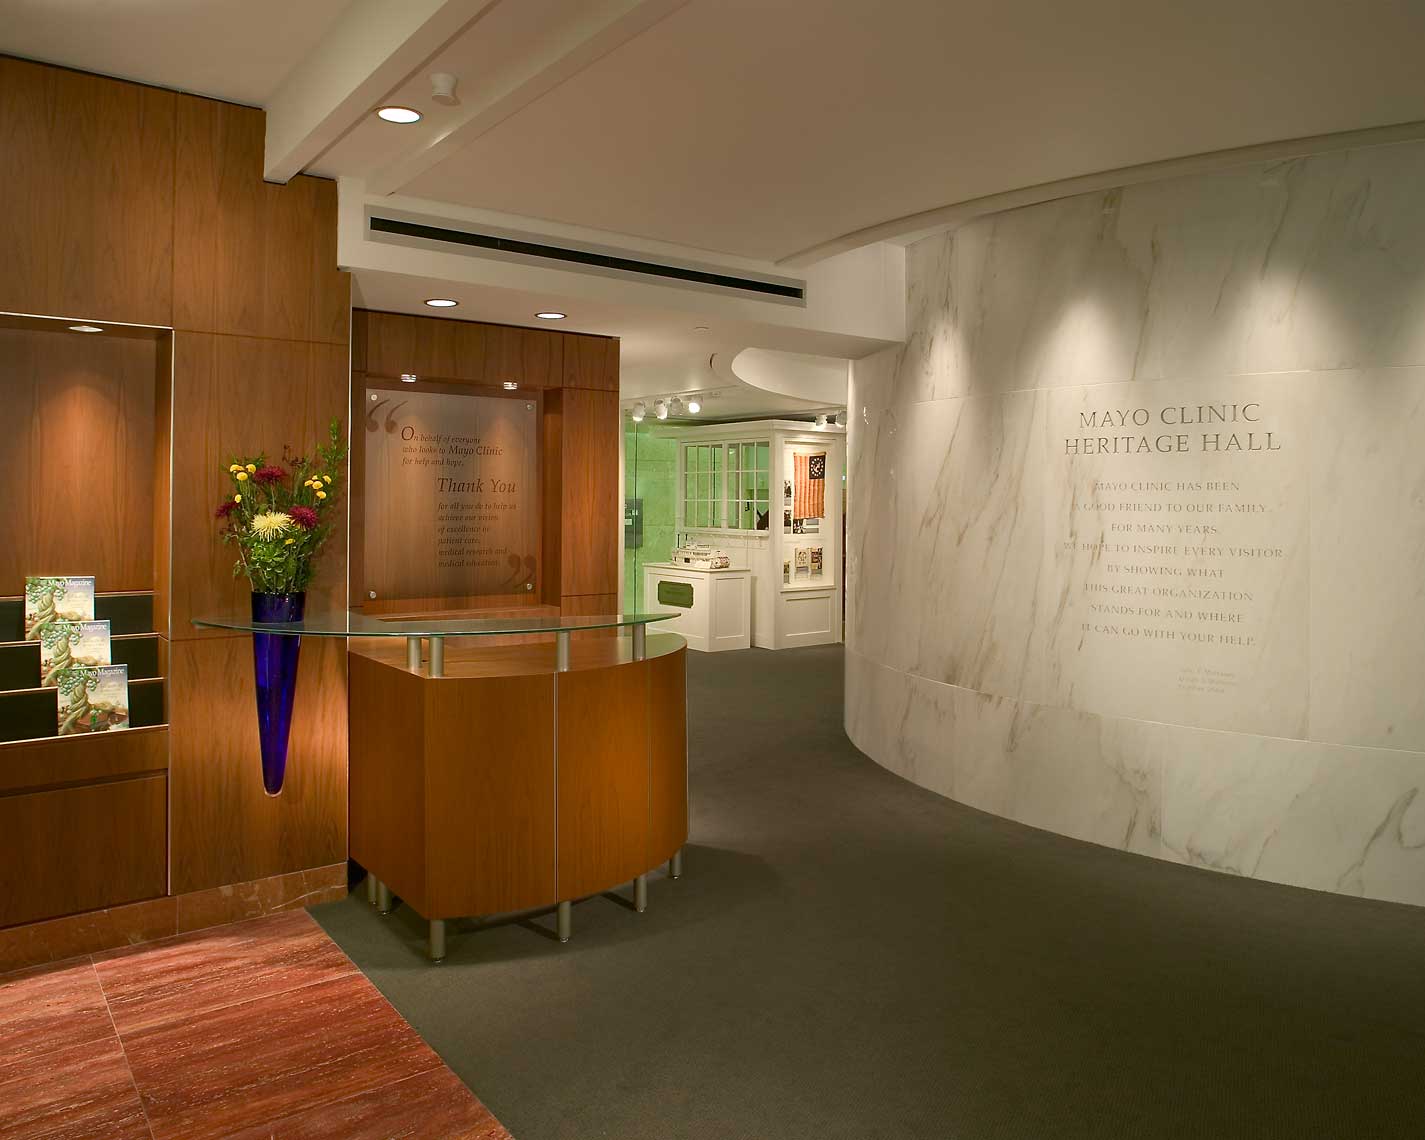 A view of the main entrance in the Mayo Clinic Heritage Hall in Rochester, Minnesota